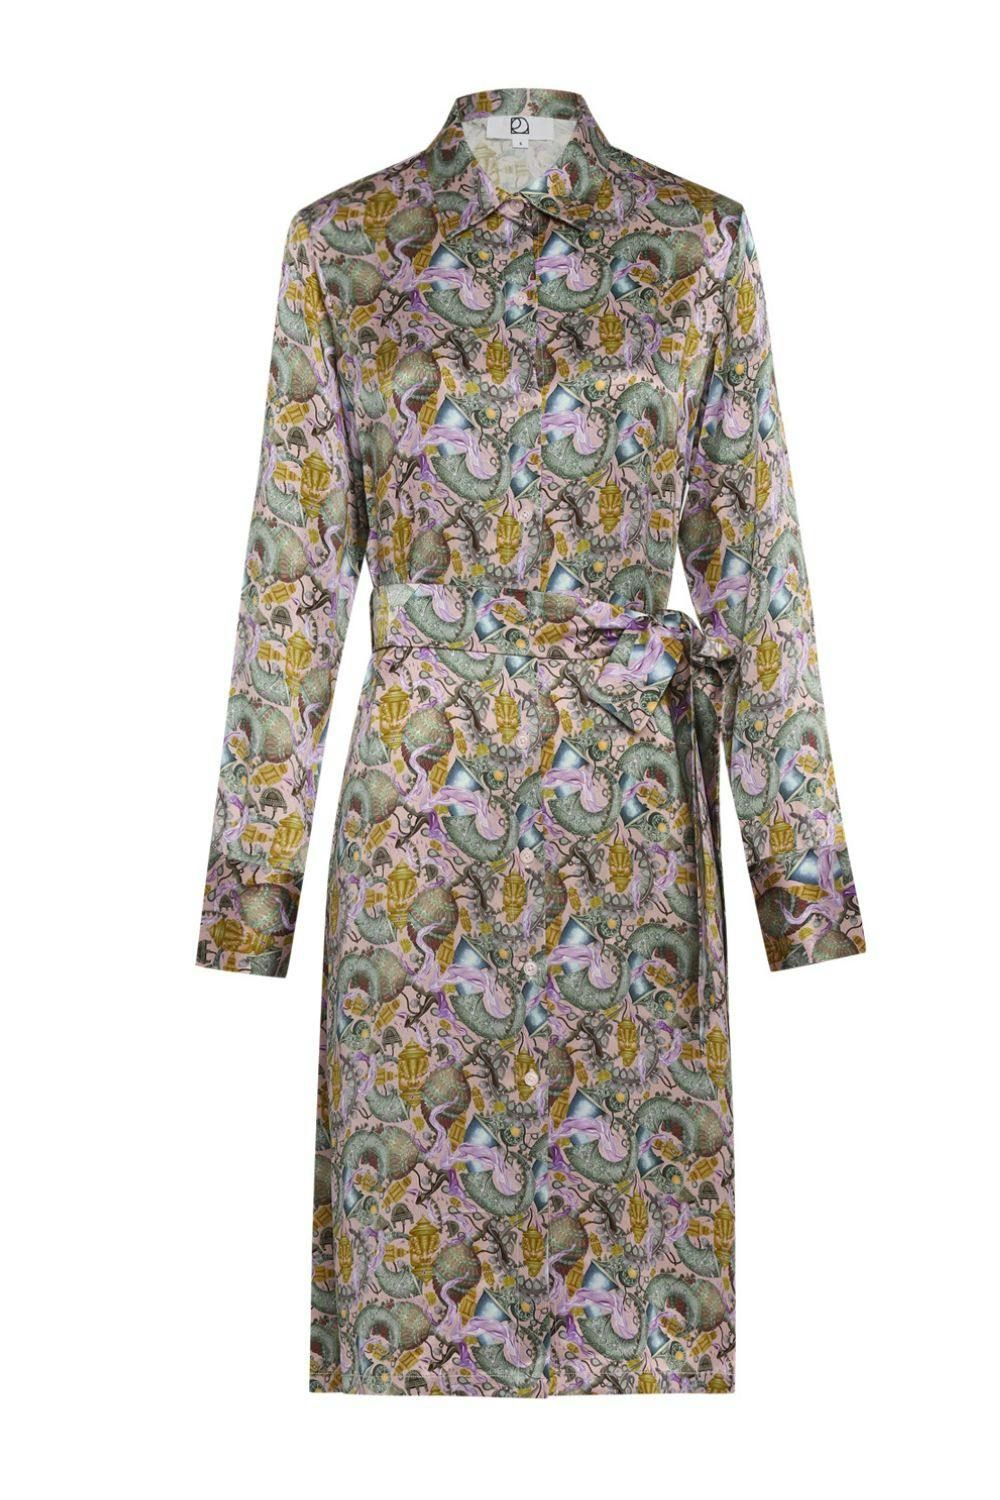 Neoteric Printed Shirt Dress, a product by Portrait of Love